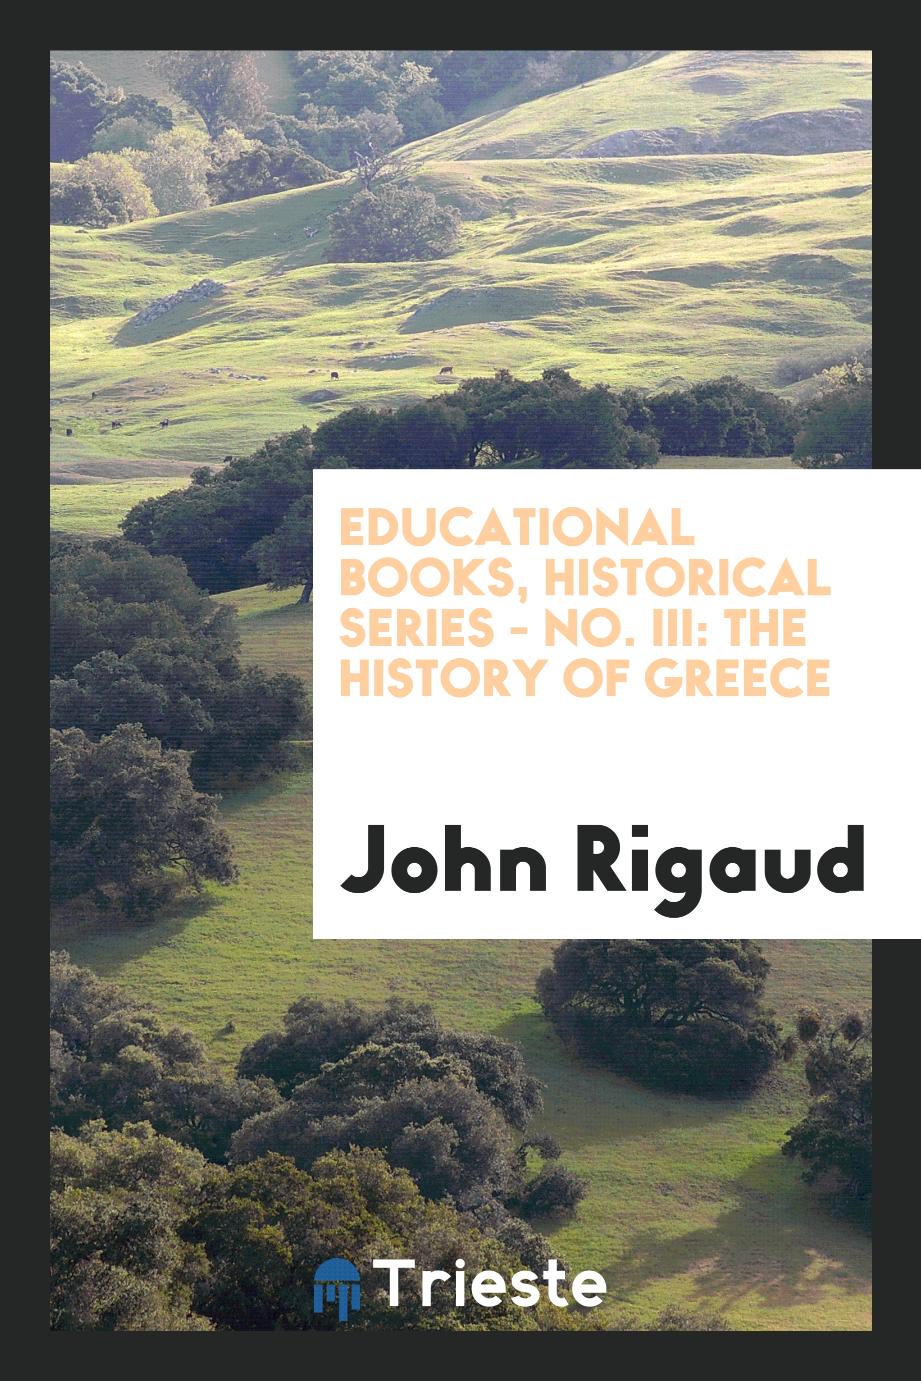 Educational Books, Historical Series - No. III: The History of Greece